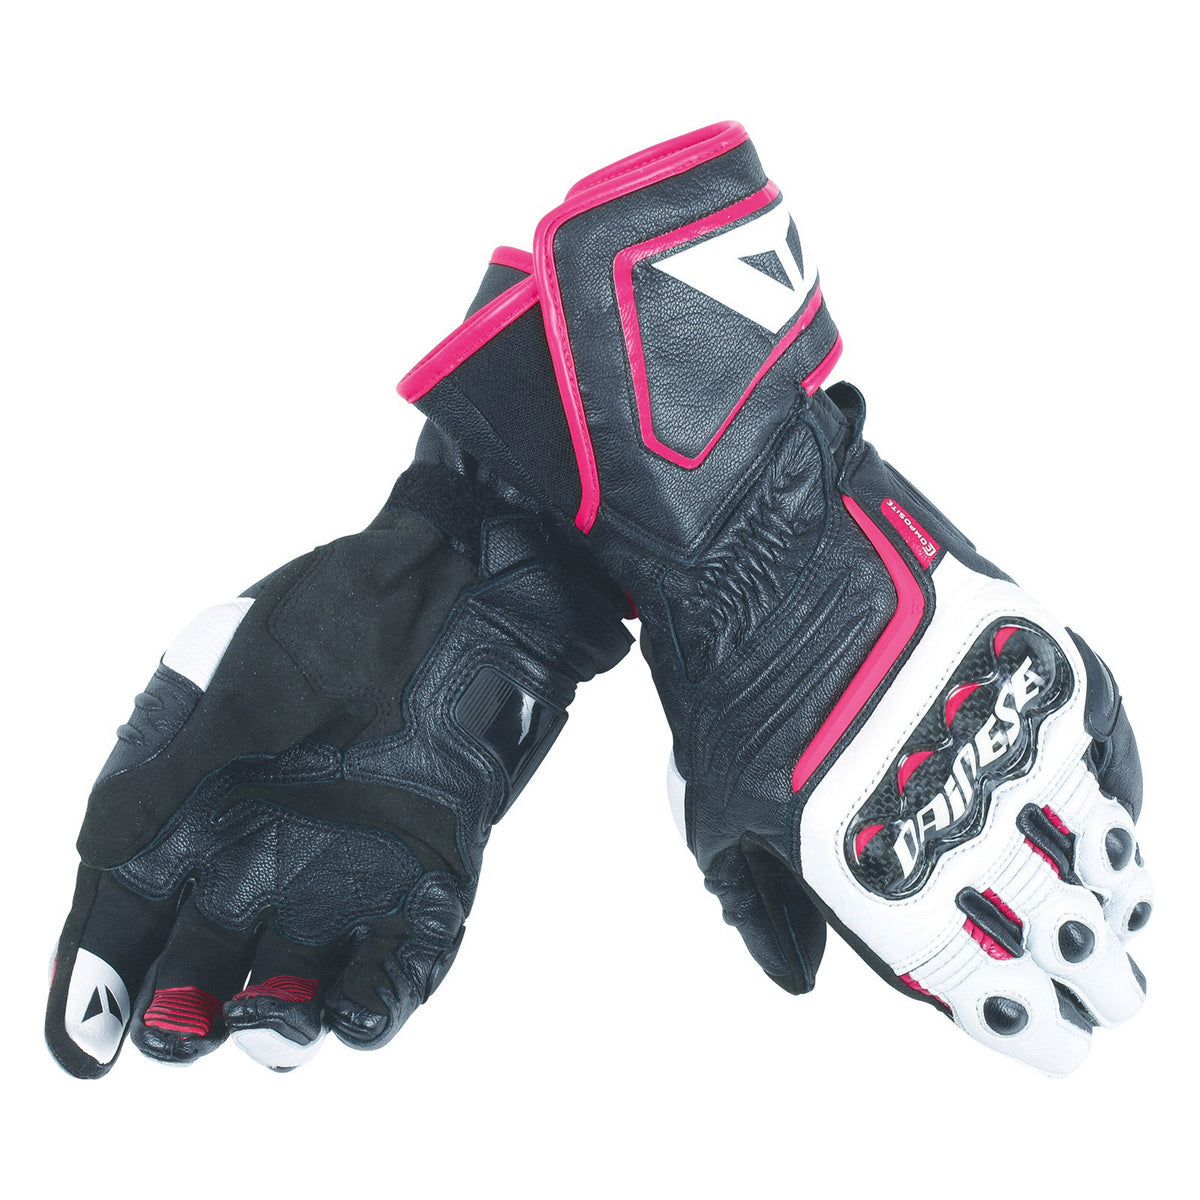 Dainese Carbon D1 Long Lady Gloves